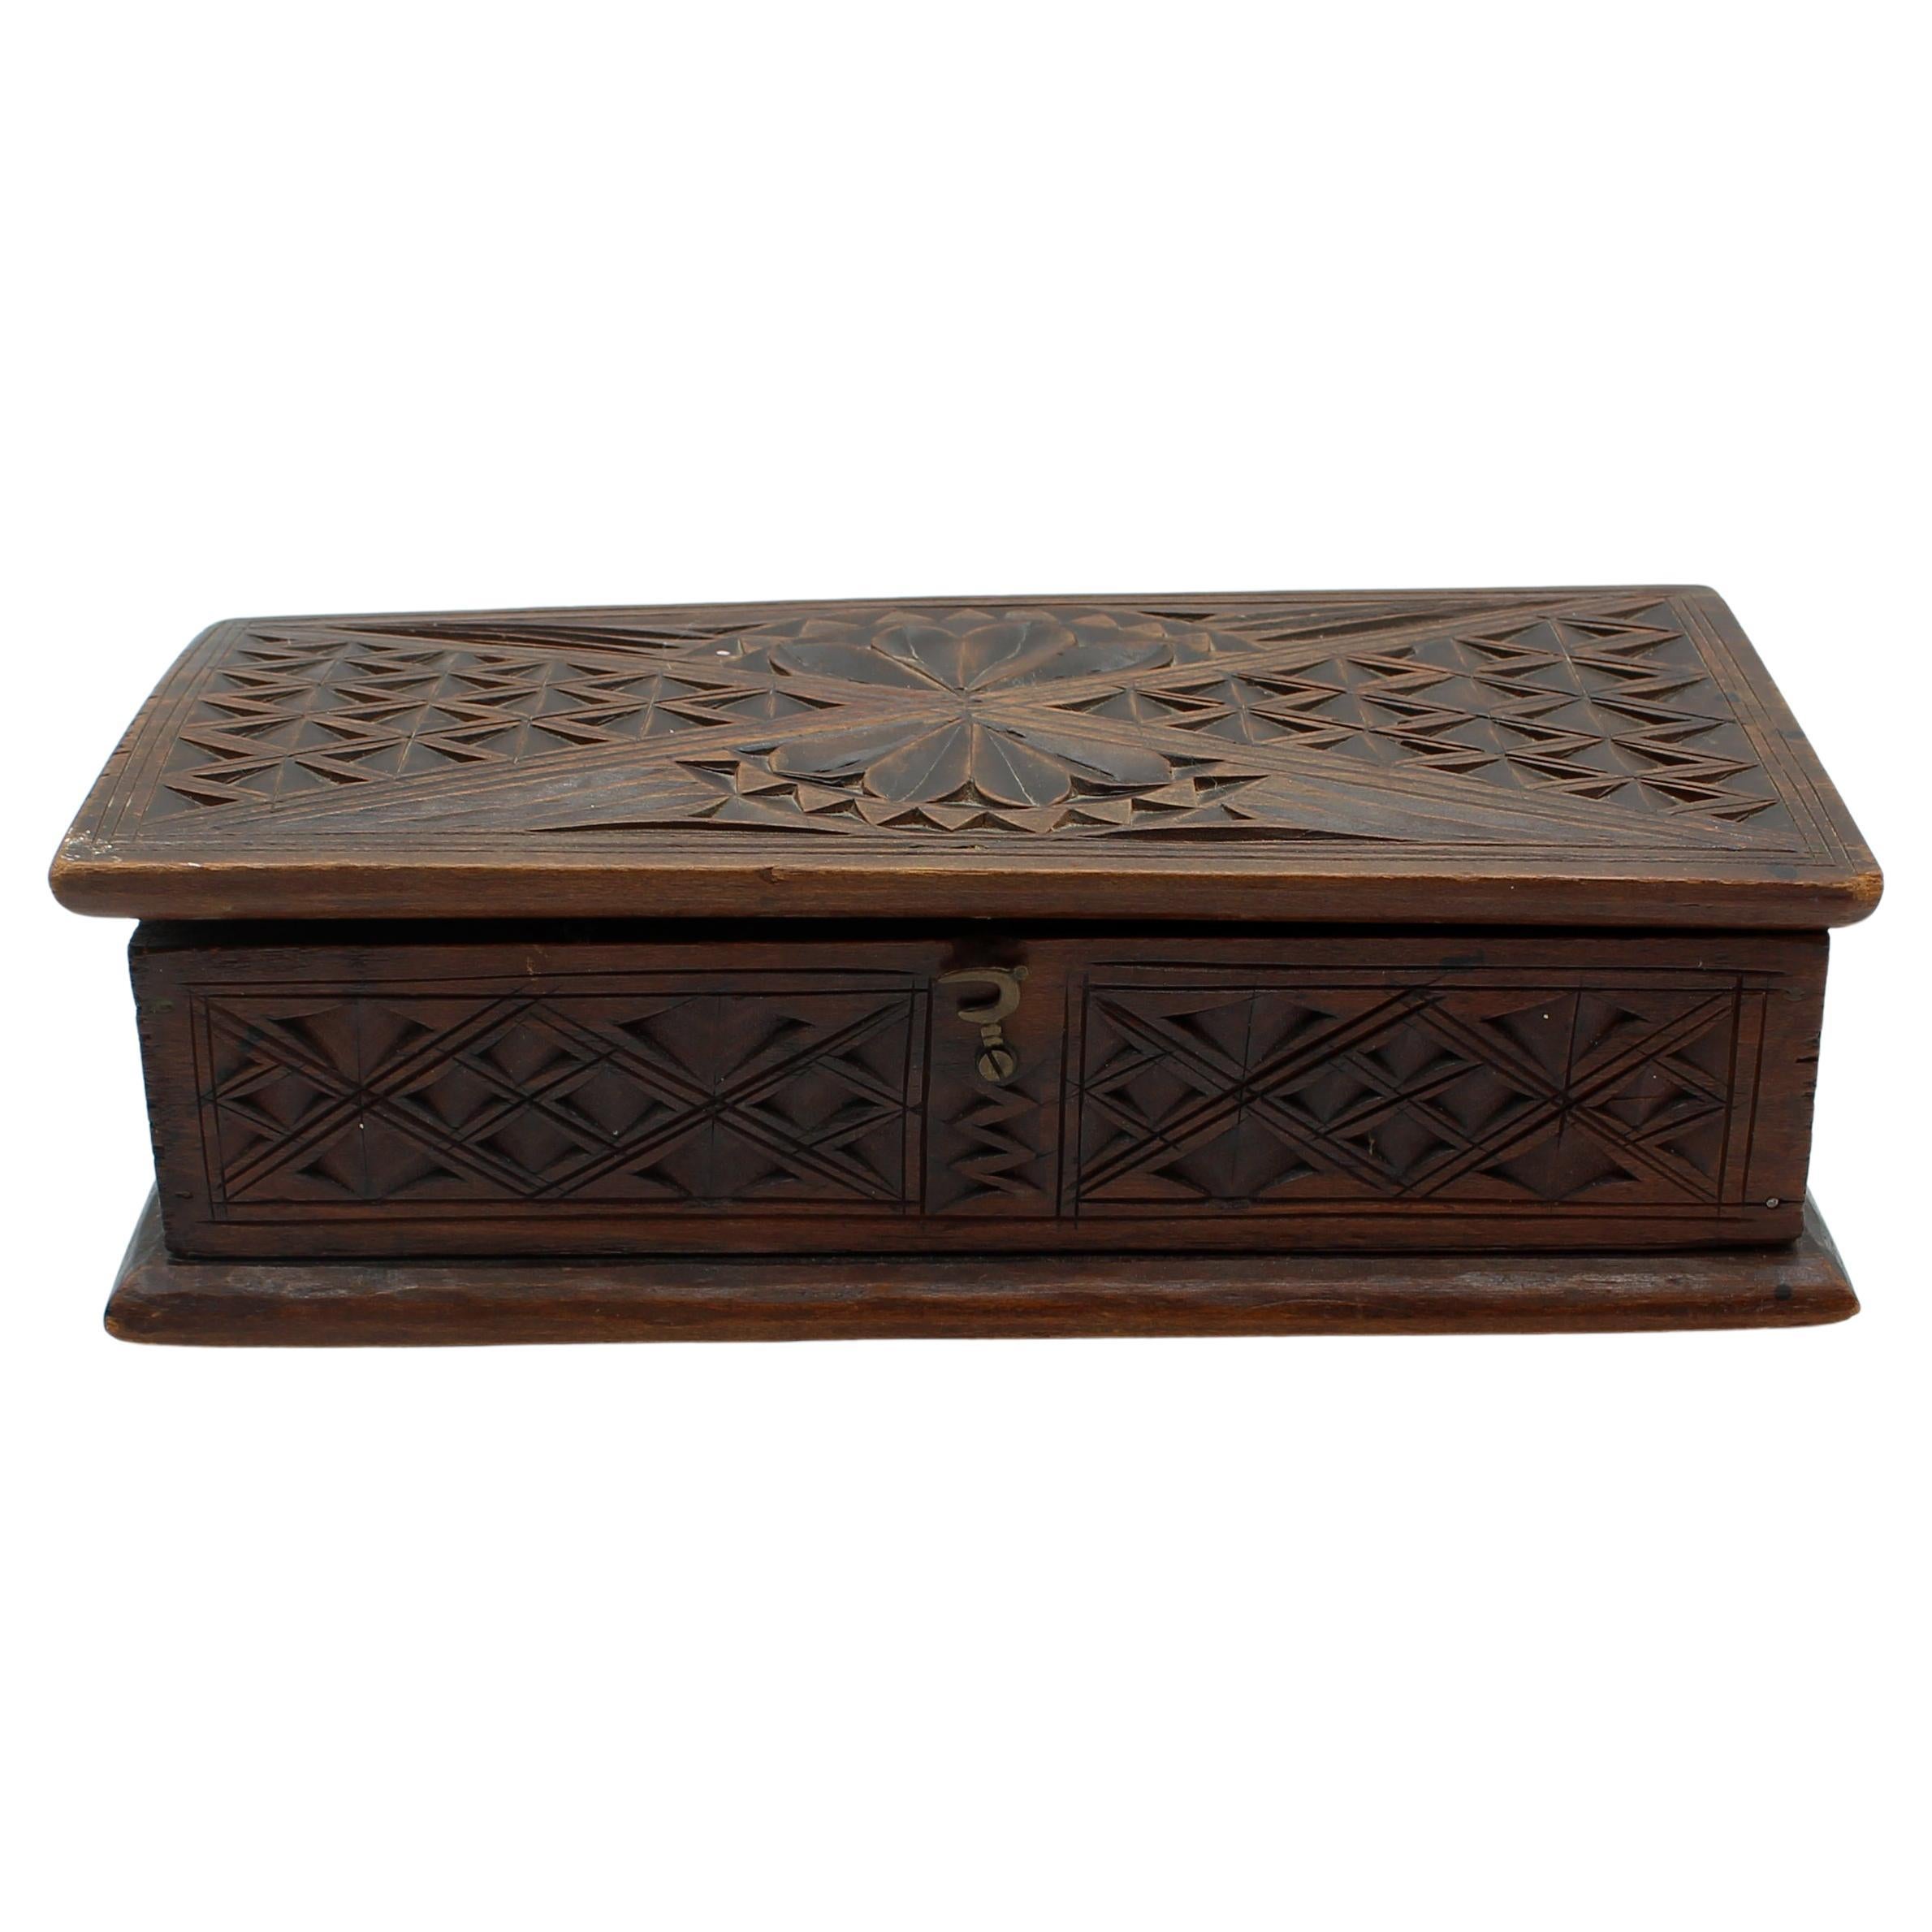 c. 1860-80 Gothic Revival Carved Box